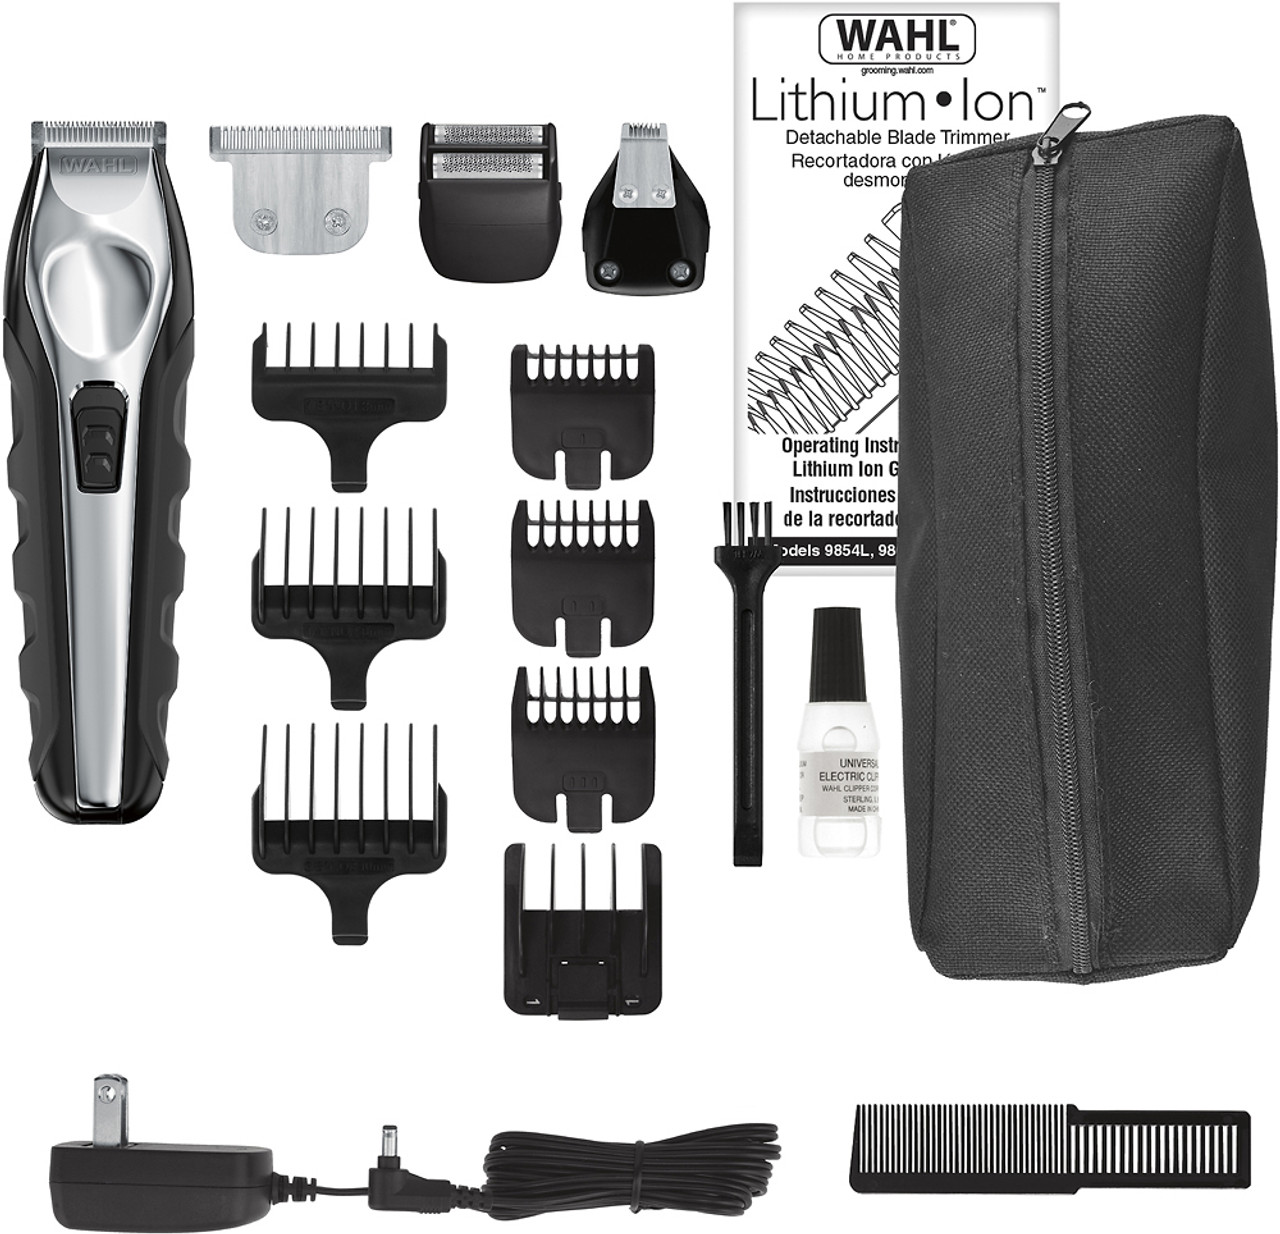 Wahl - Lithium Ion Rechargeable Trimmer - Black/silver